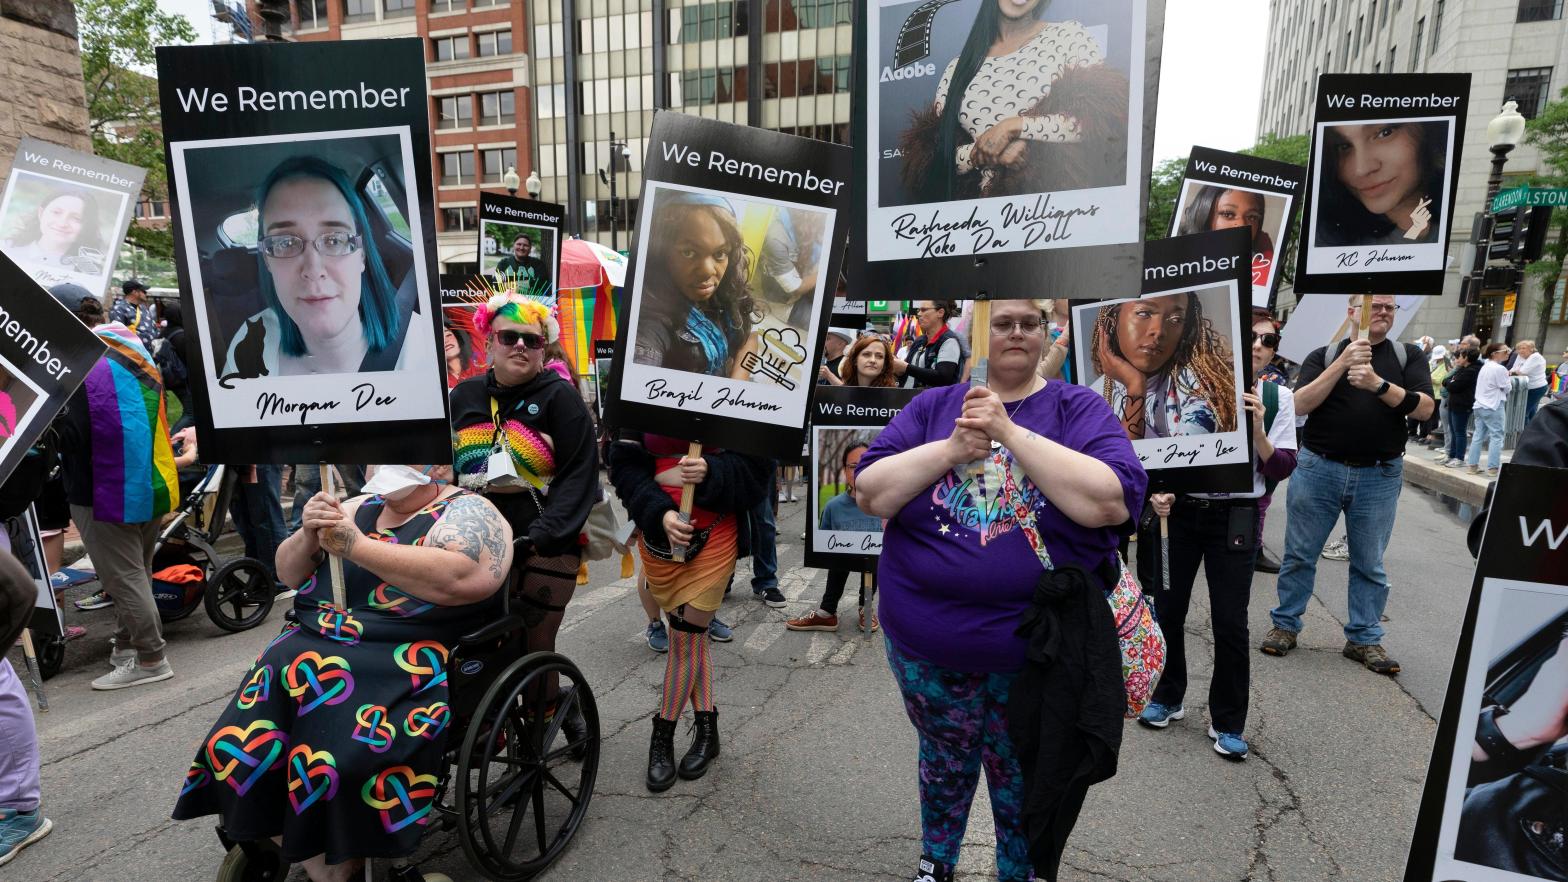 Marchers in the Boston Pride Parade held up photos memorializing members of the transgender community killed due to trans hate. (Photo: Michael Dwyer, AP)